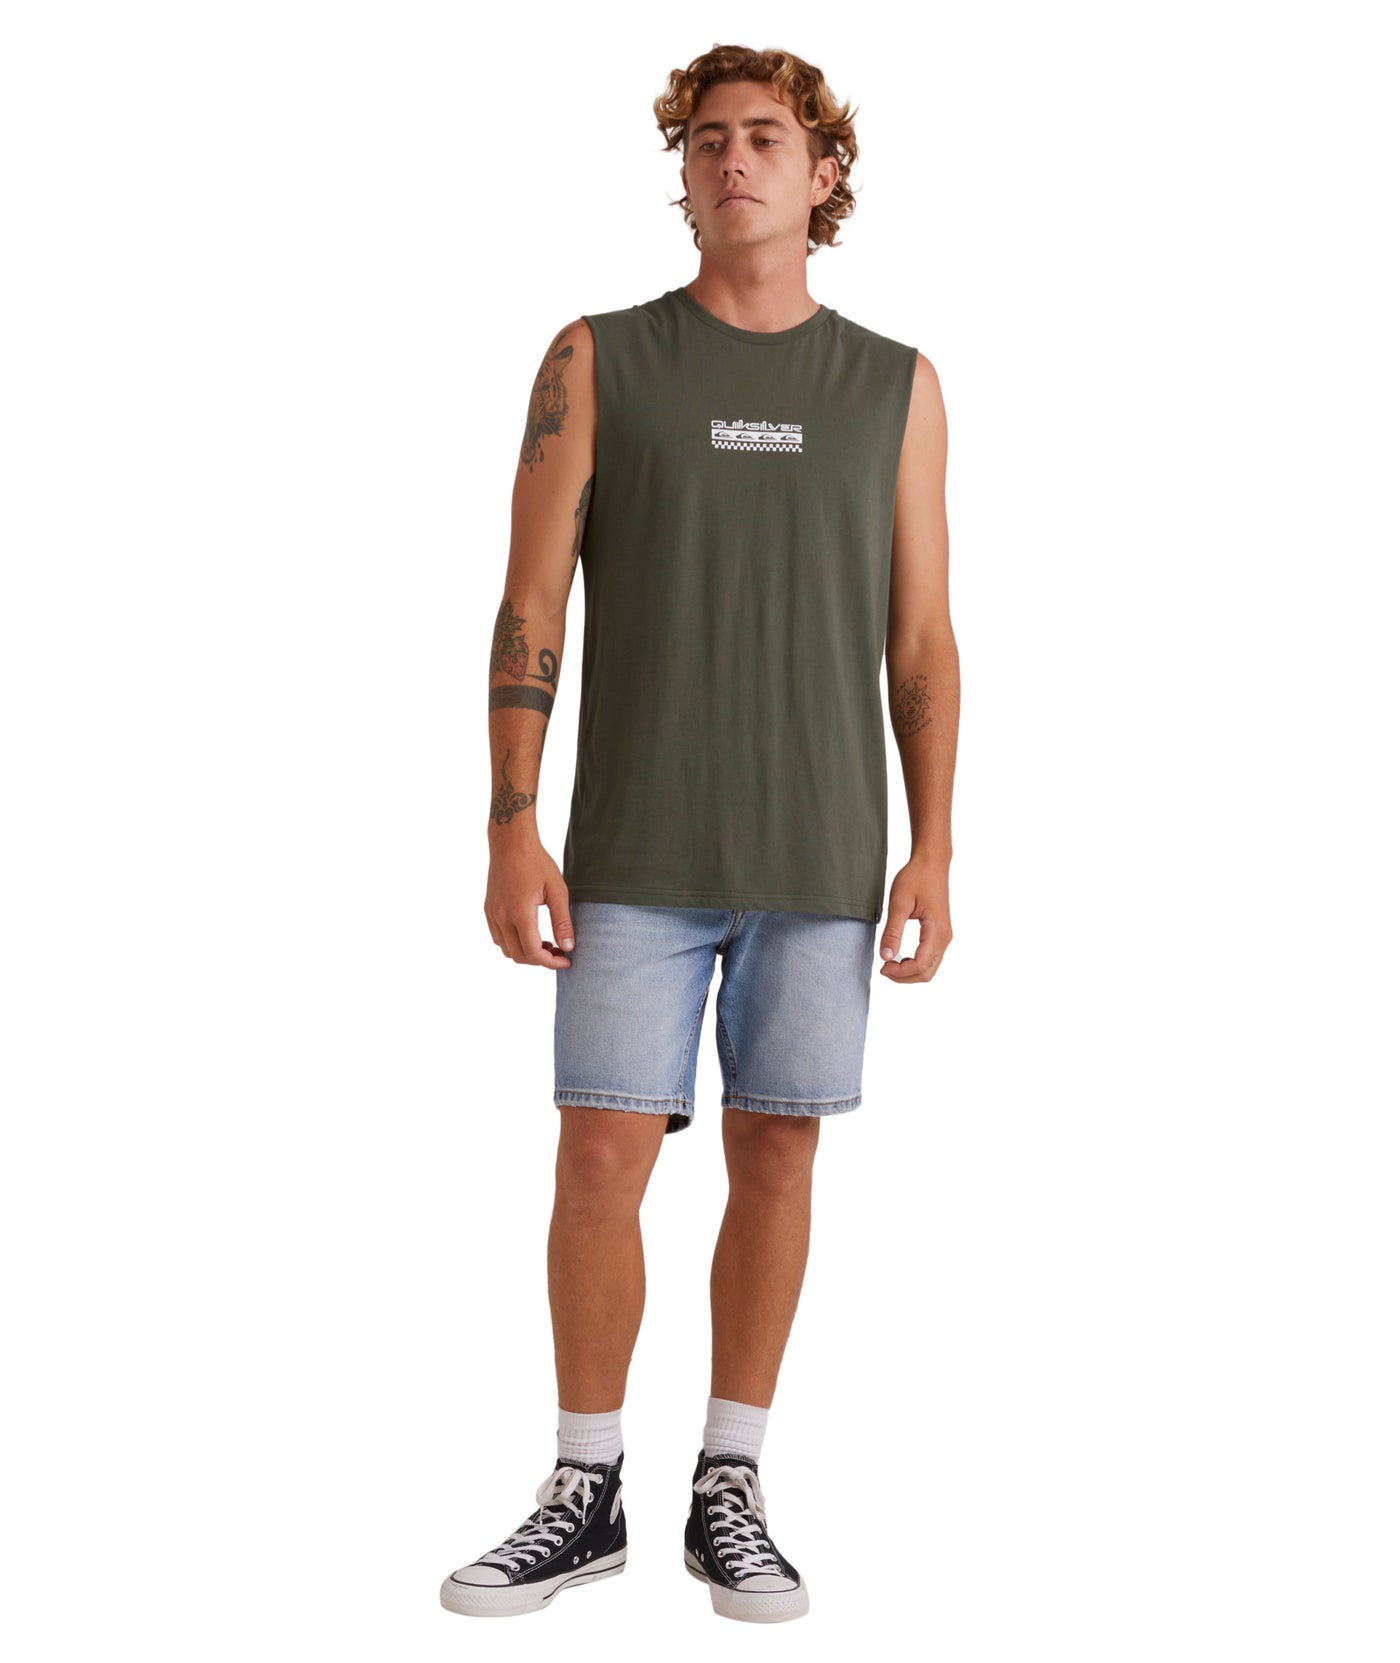 Quiksilver Omni Check Turn Muscle